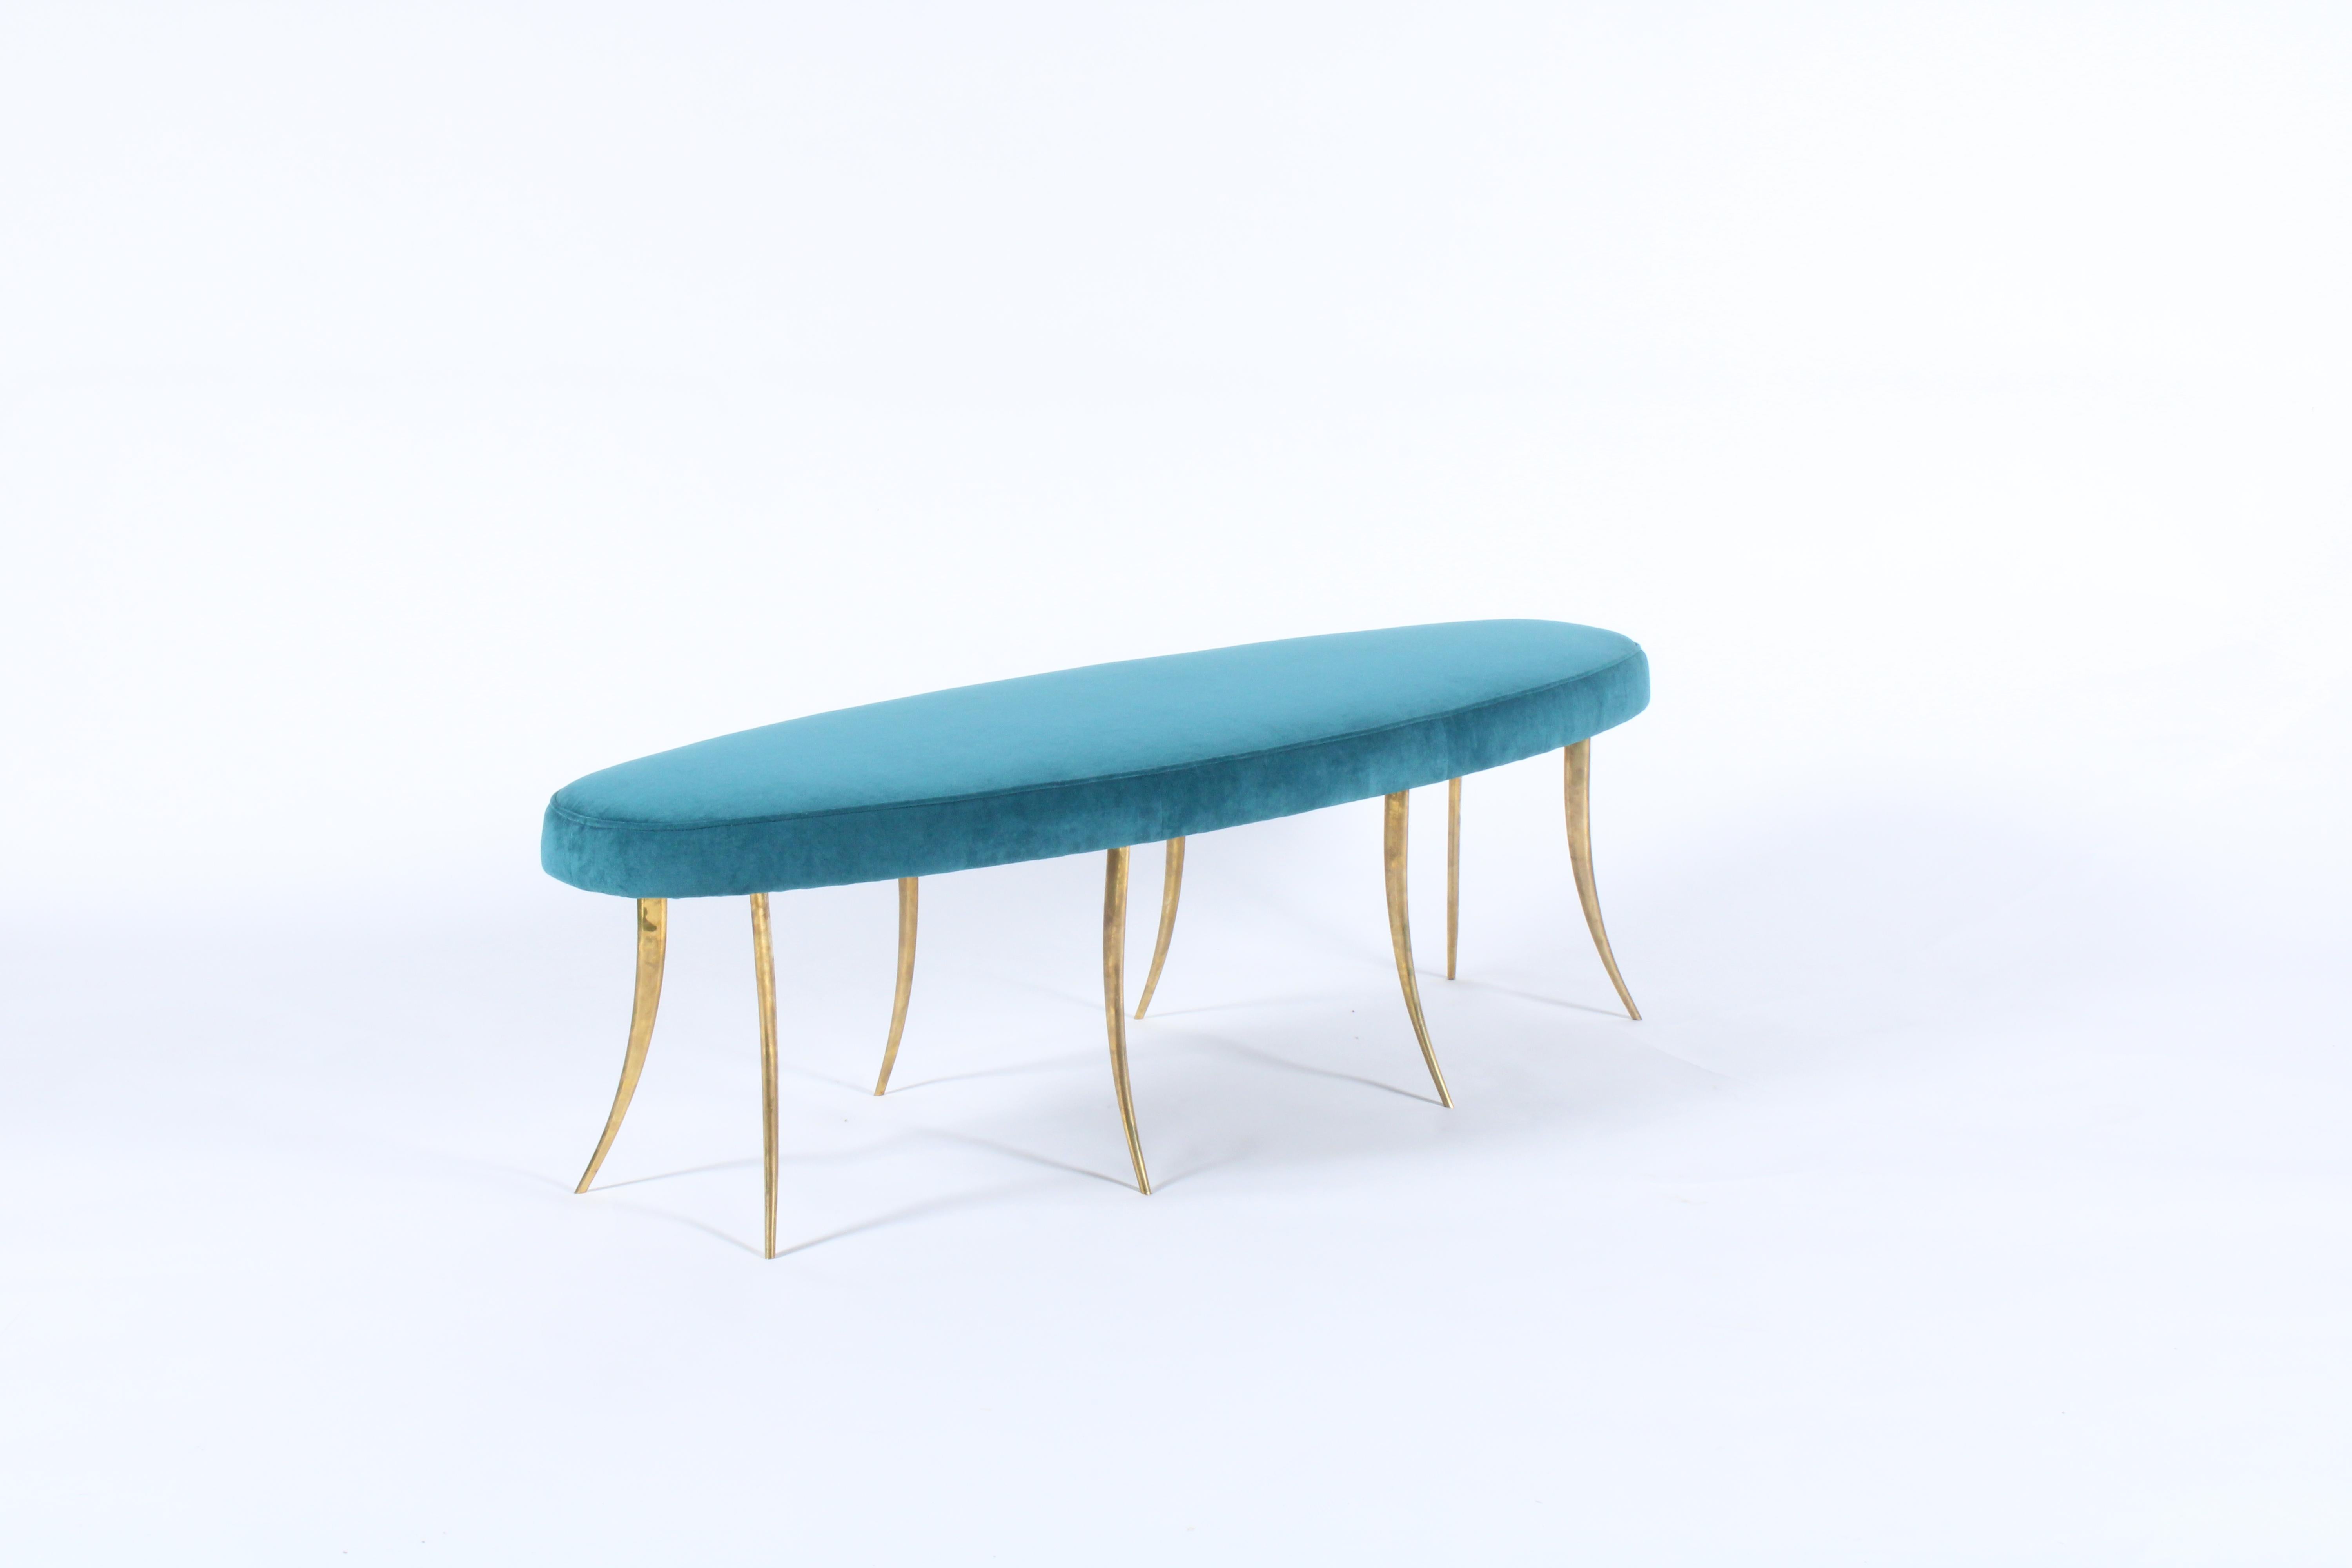  Bespoke Vintage Italian Bench with Teal Upholstered Cushion For Sale 5